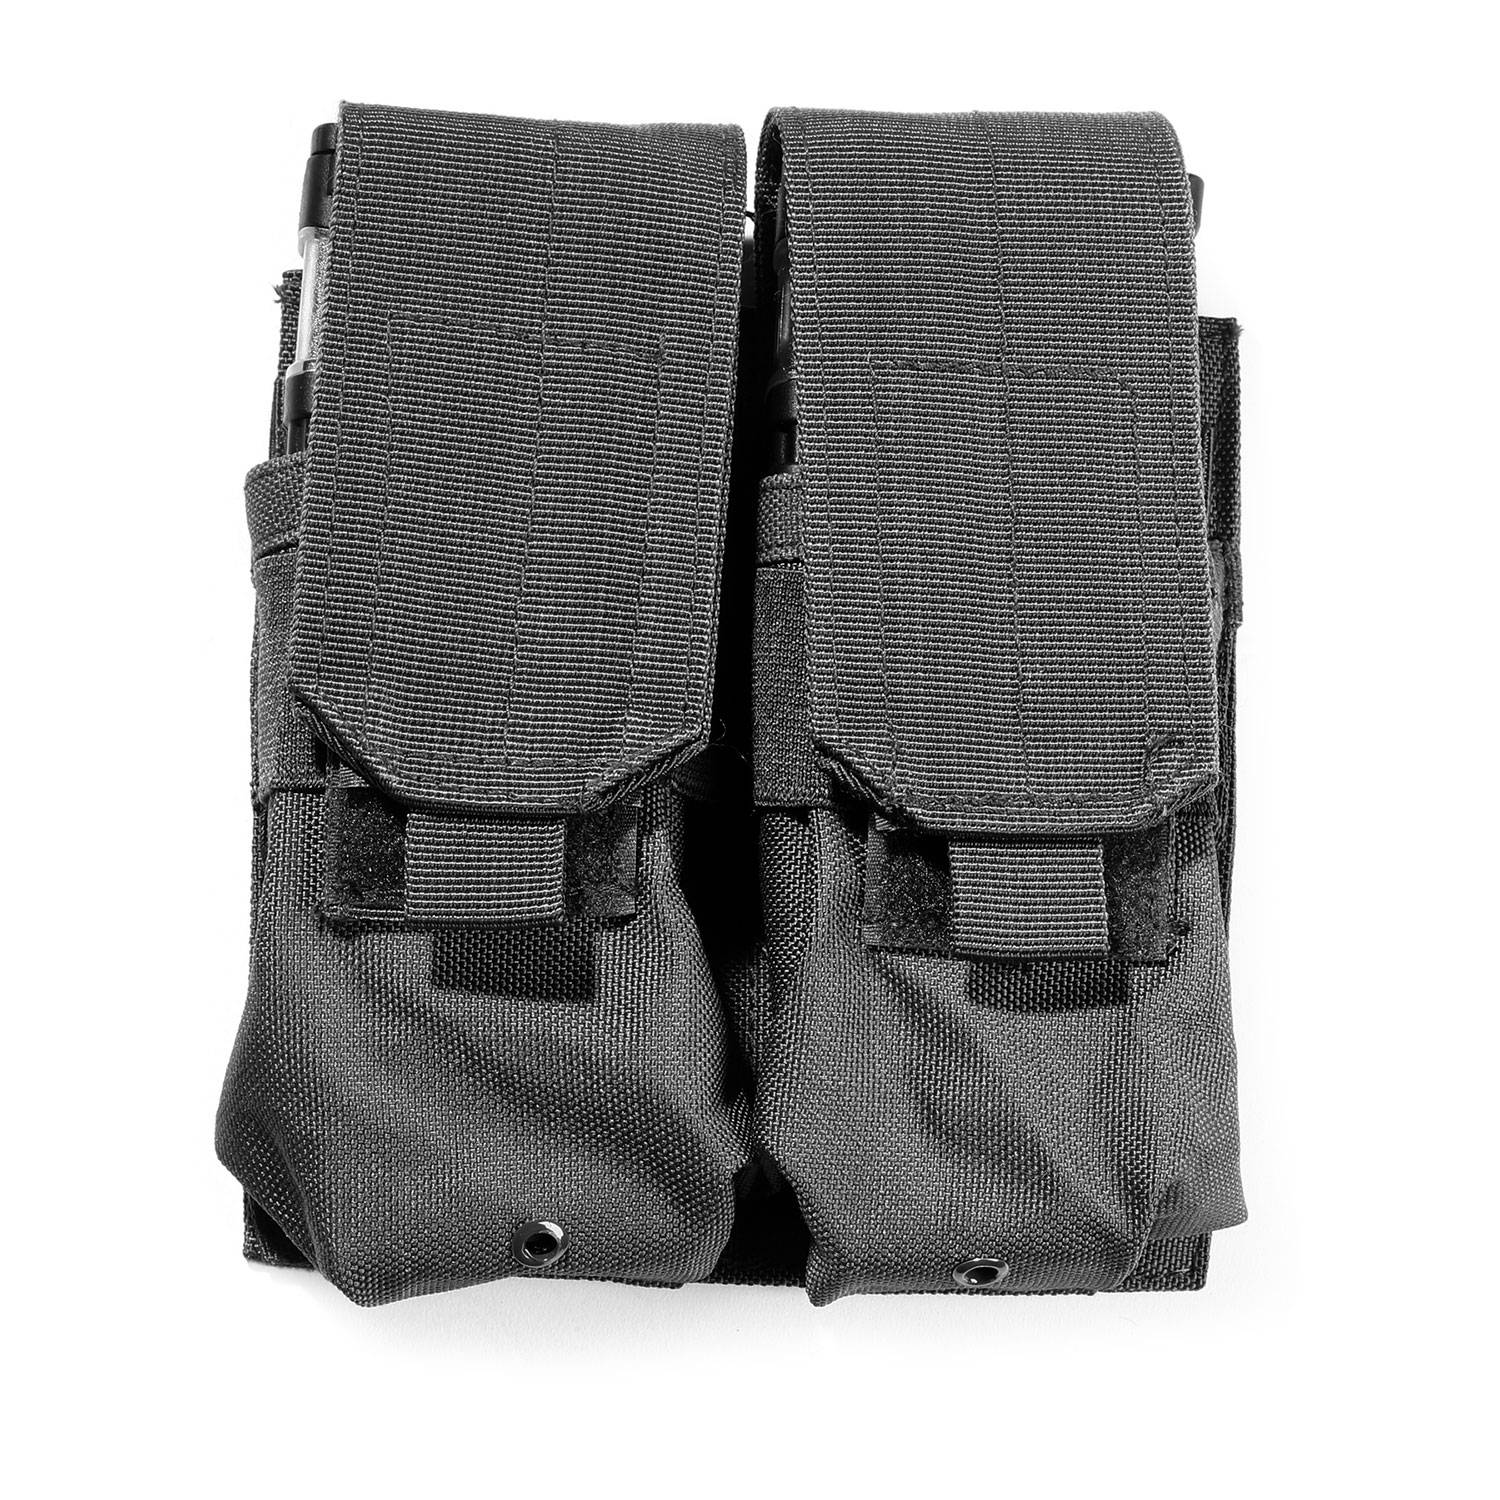 5IVE STAR GEAR ARDP-5S M14/M16 DOUBLE MAG POUCH